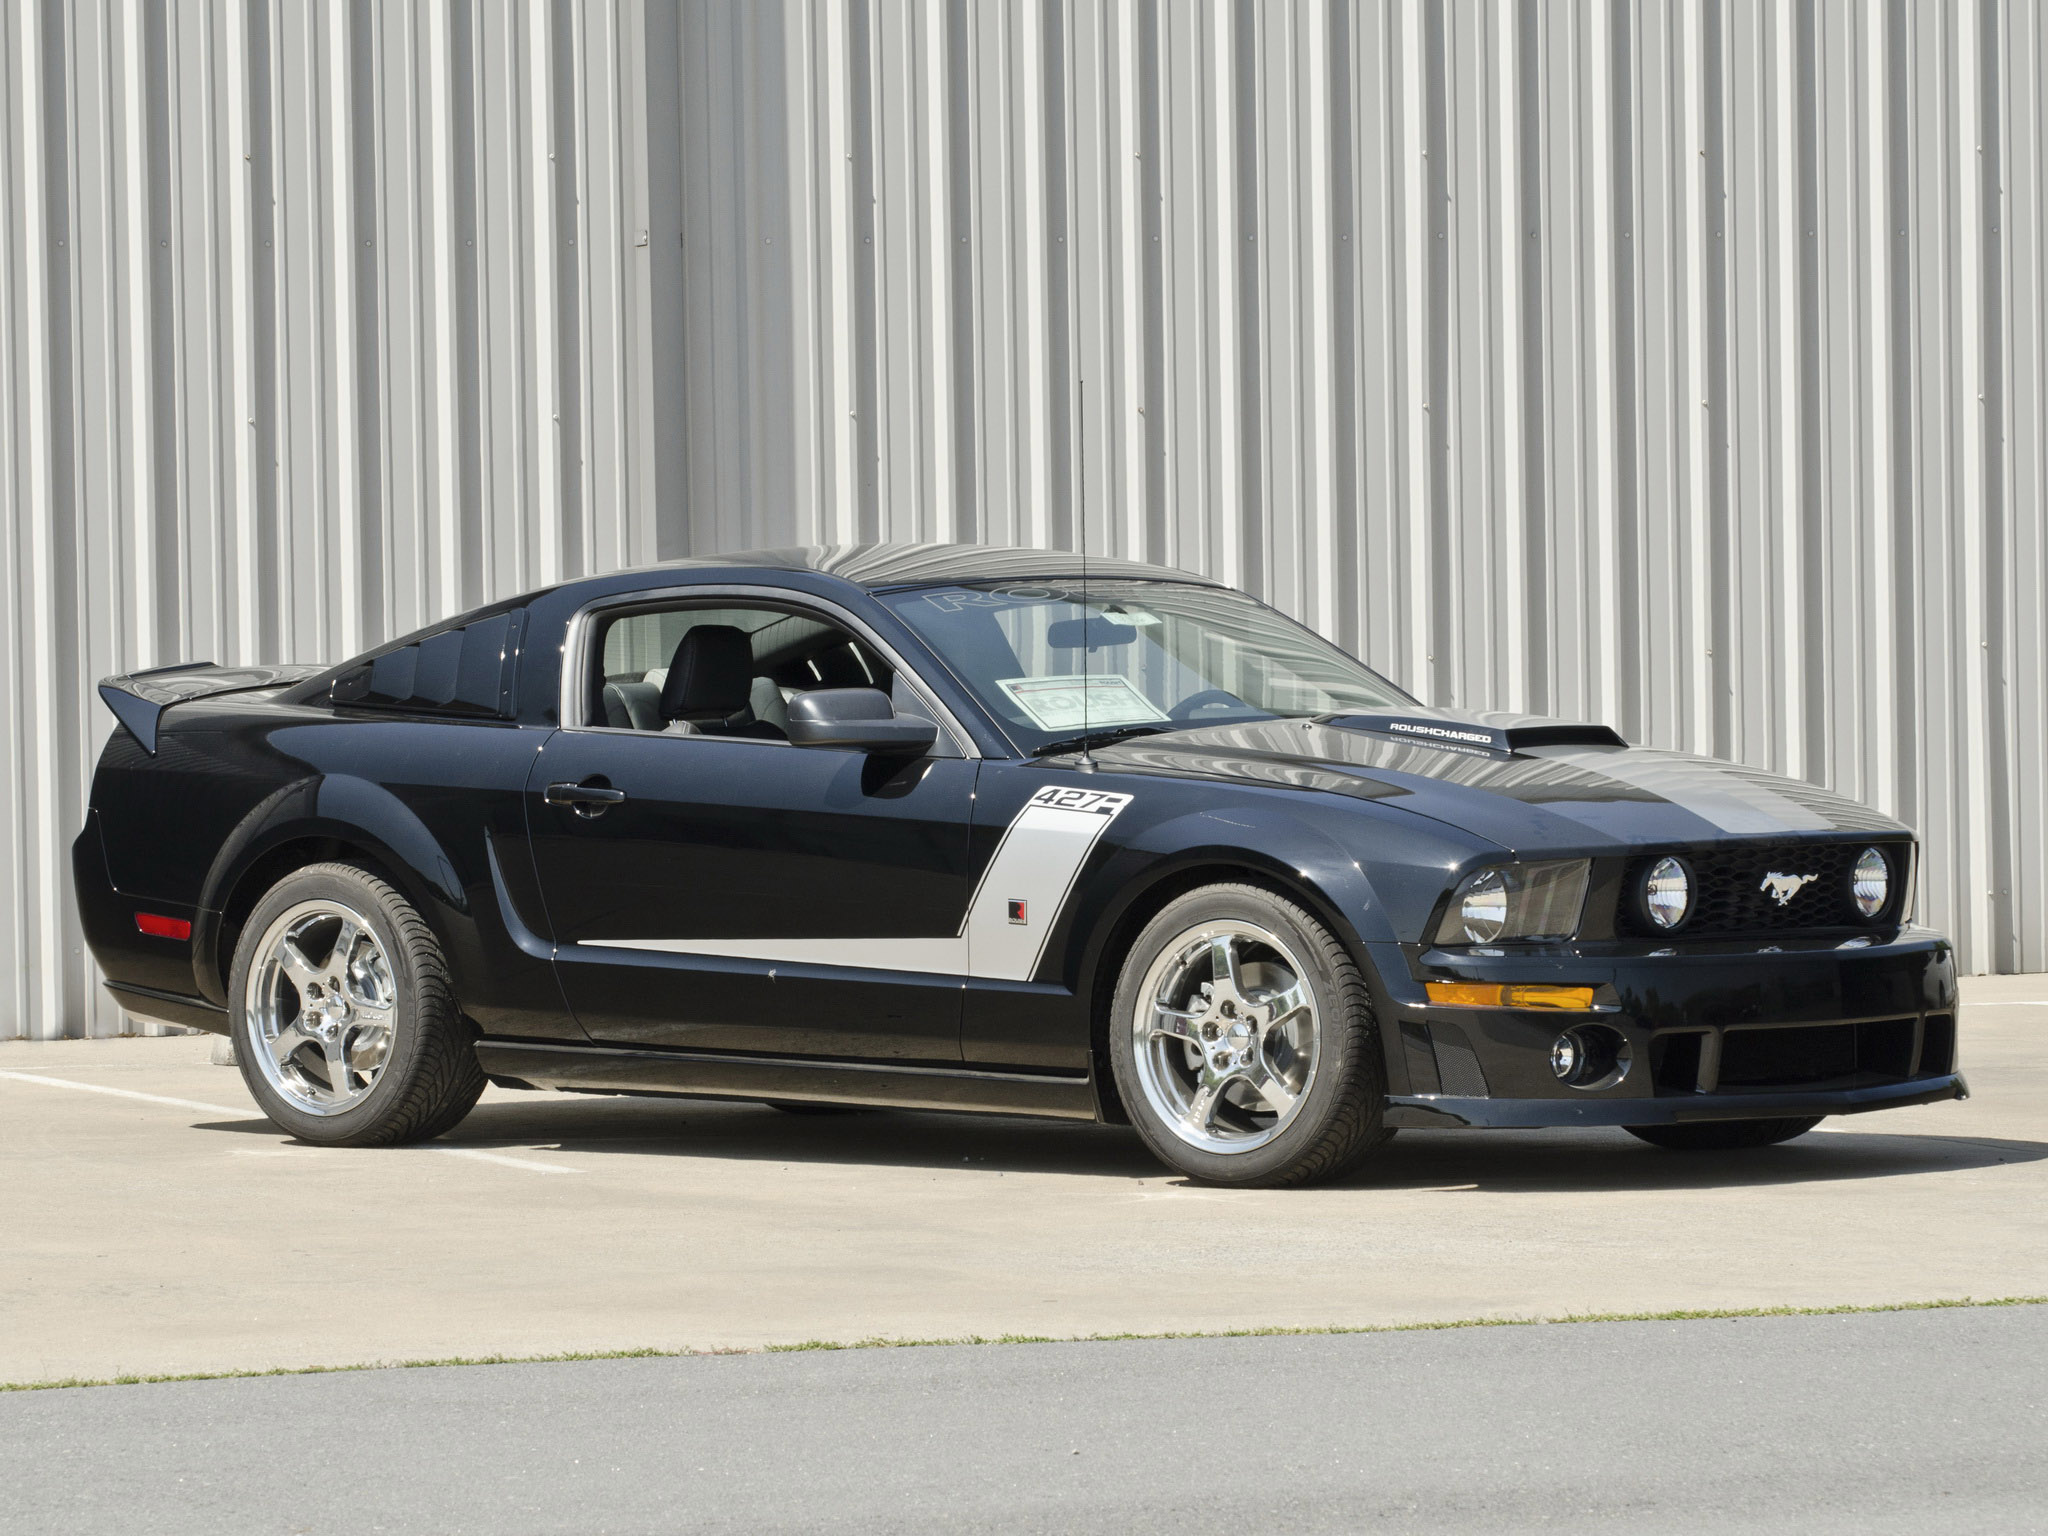 2009, Roush, Ford, Mustang, 427r, Muscle, Tuning, Hot, Rod, Rods Wallpaper